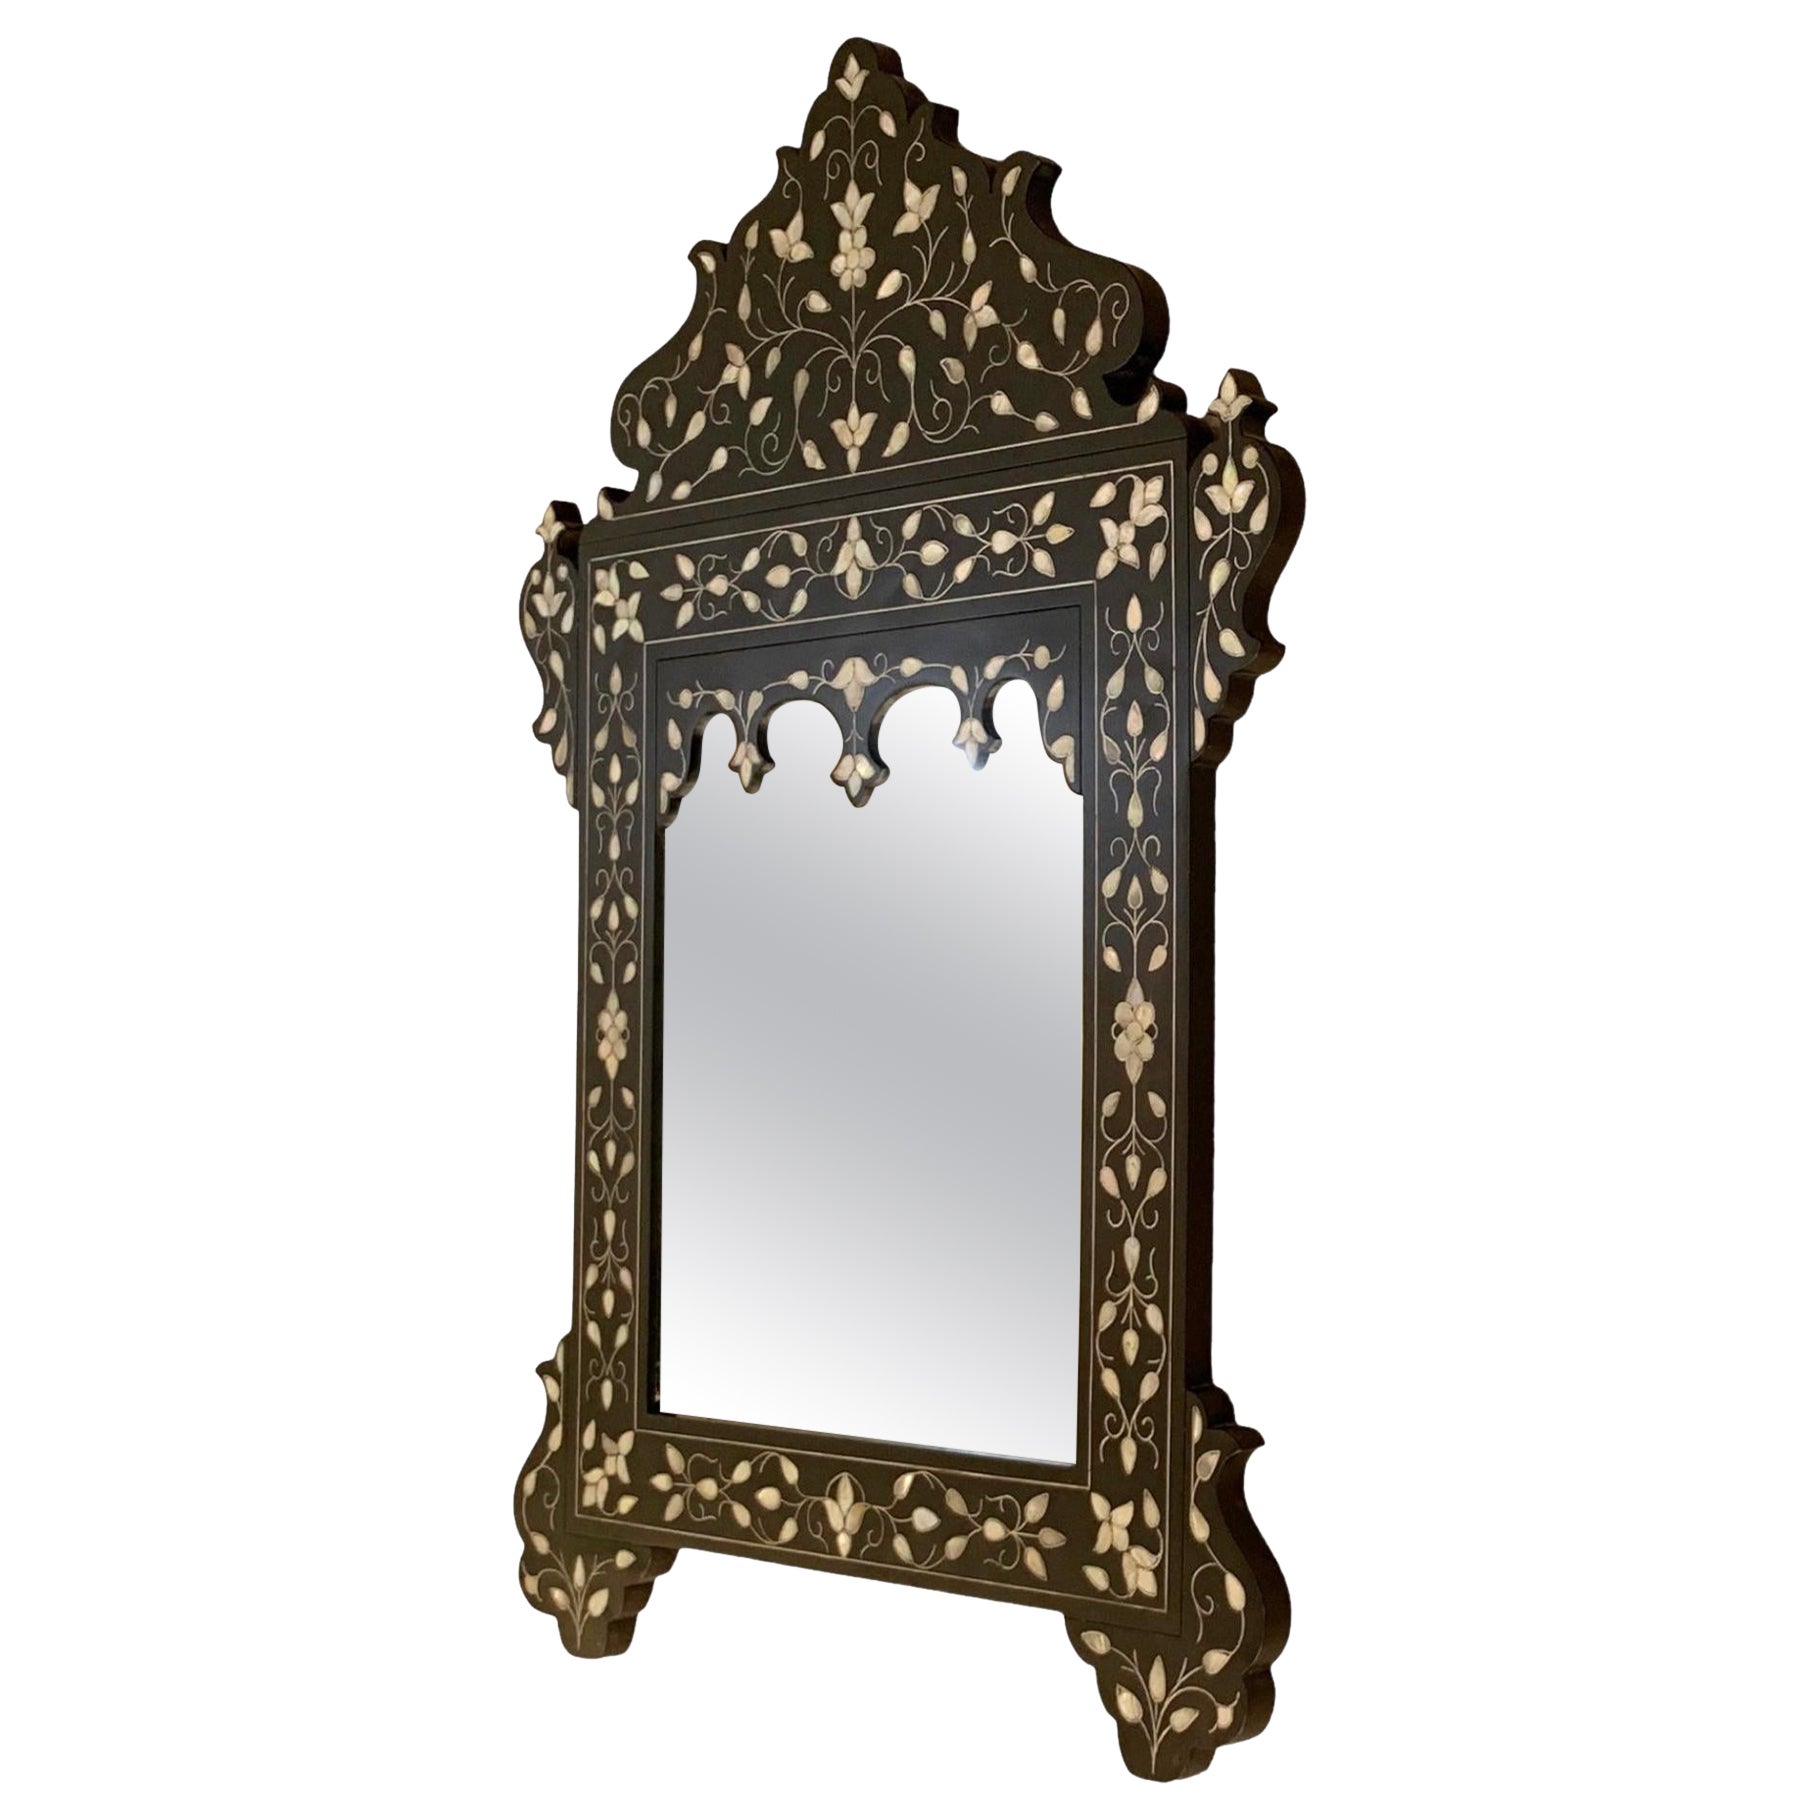 Hand-crafted Wood Mirror with Mother-of-pearl Inlay